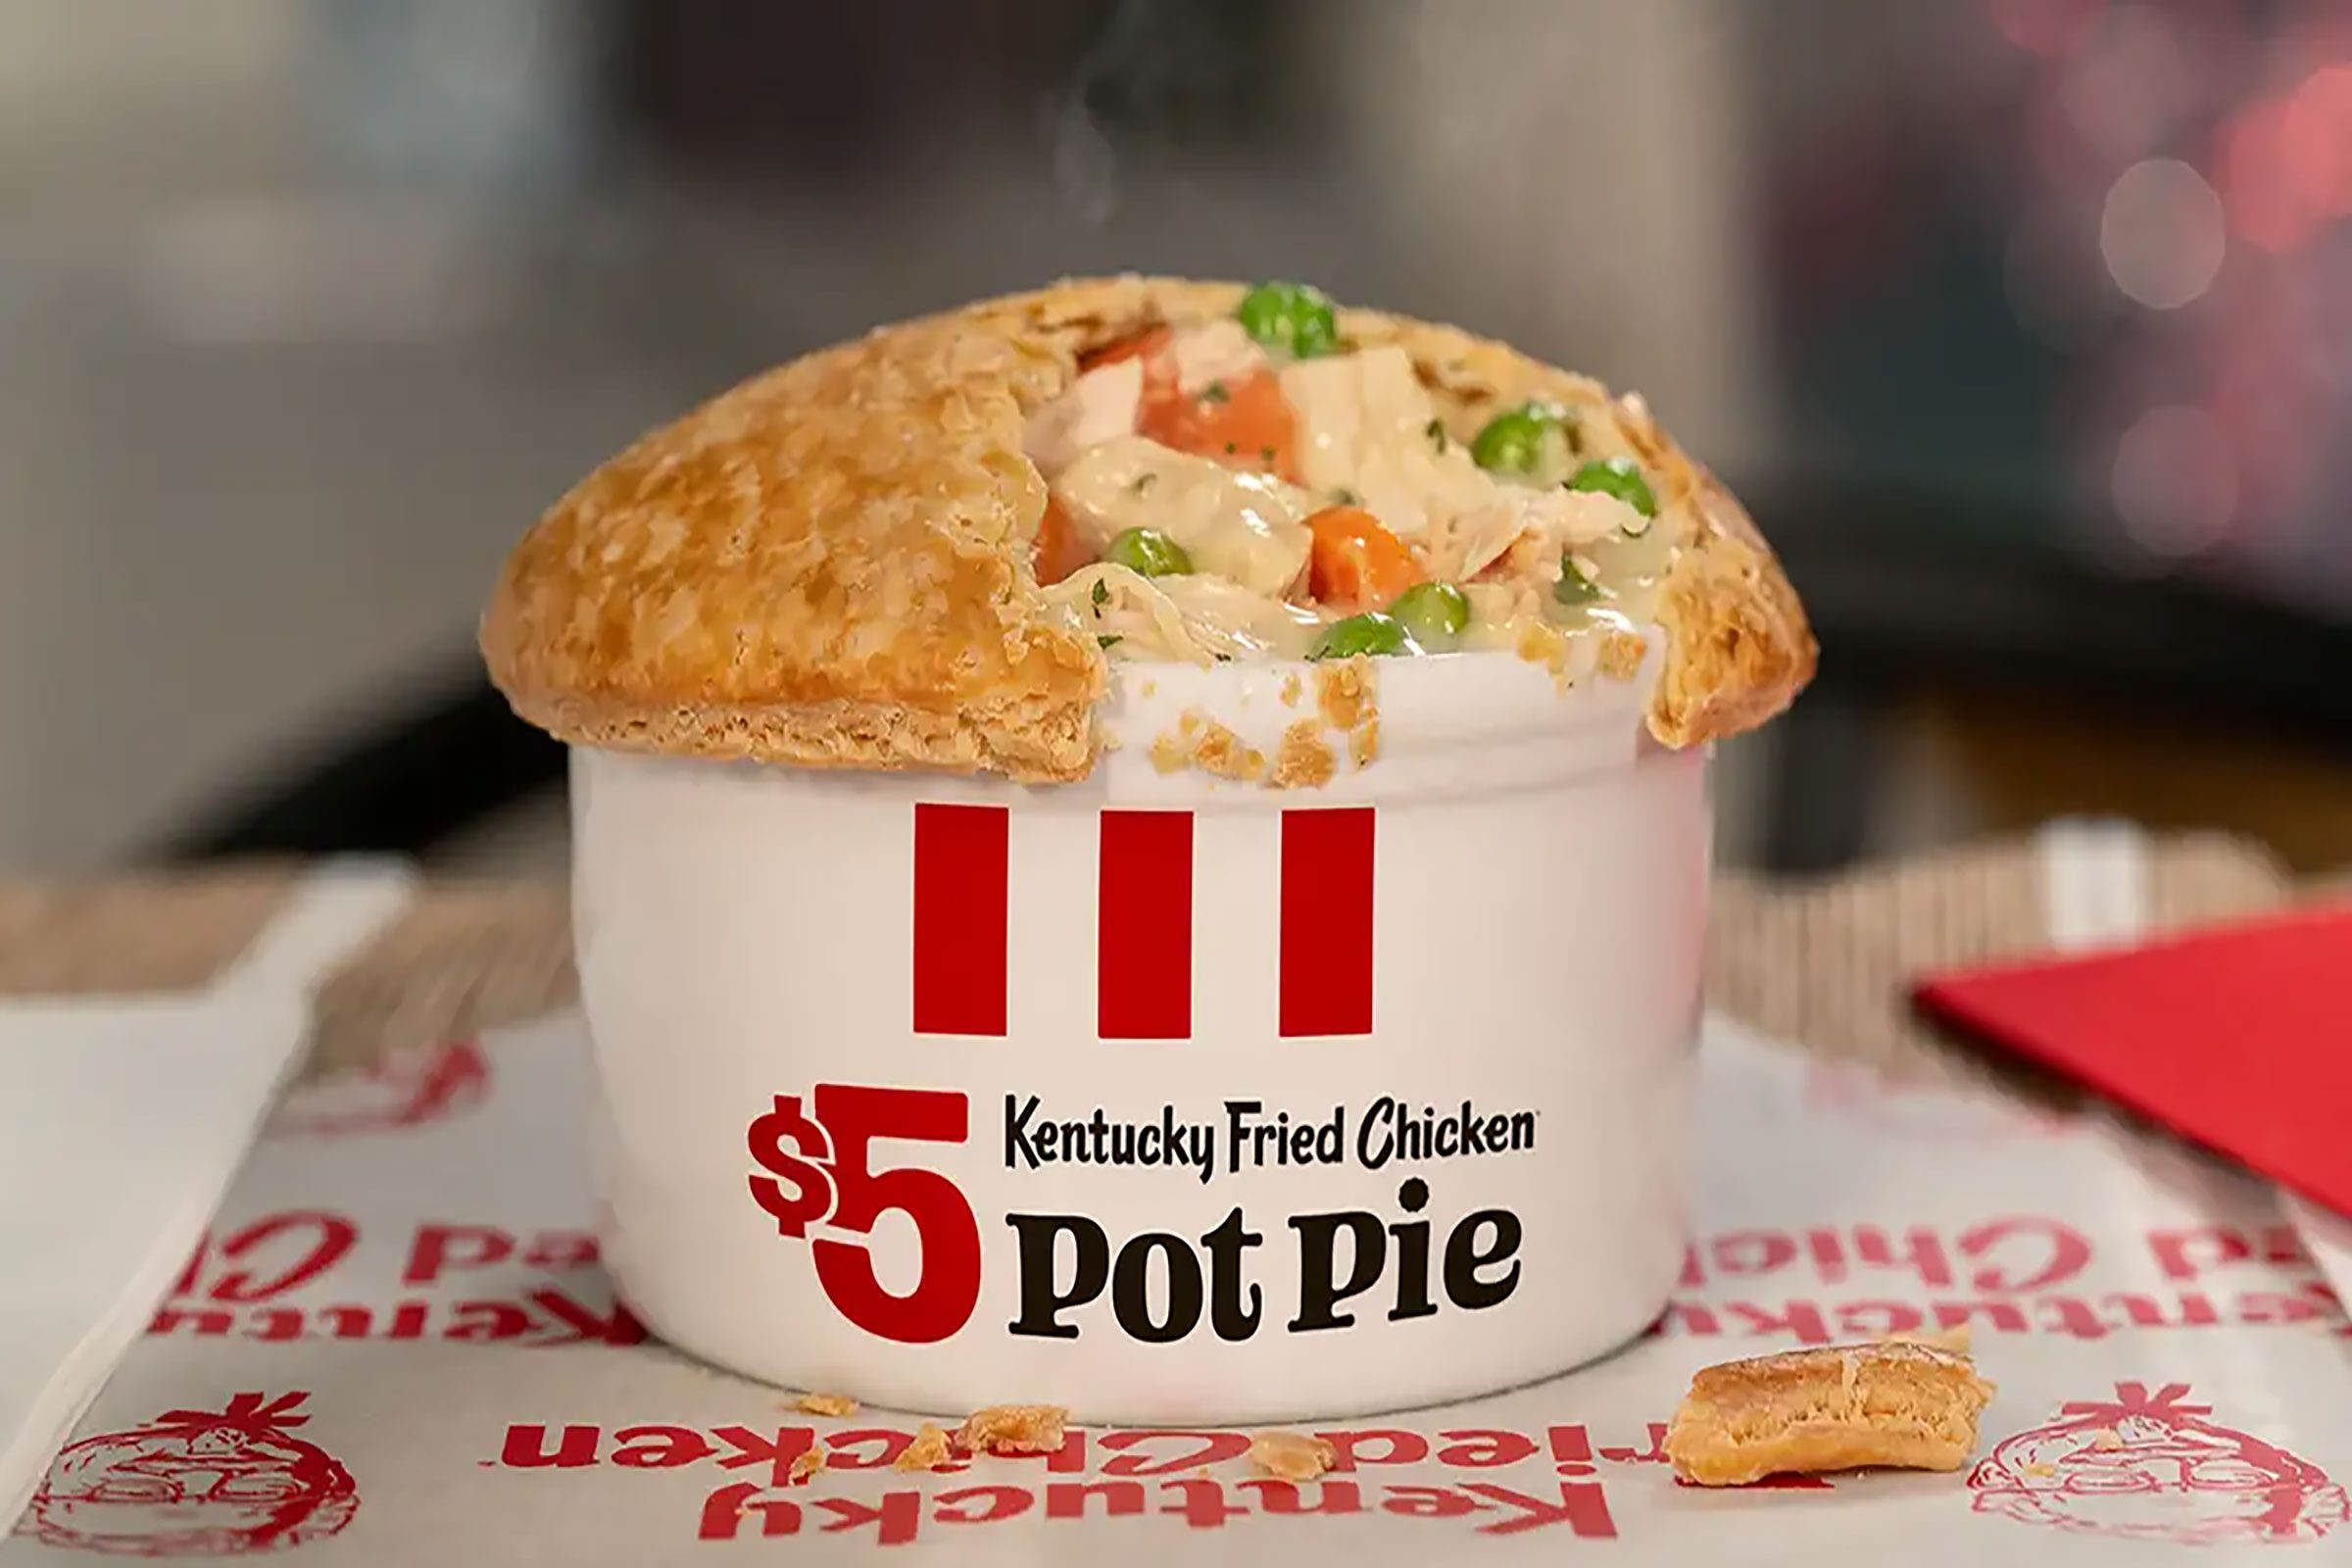 You Can Get the KFC Chicken Pot Pie for Only 5 Right Now